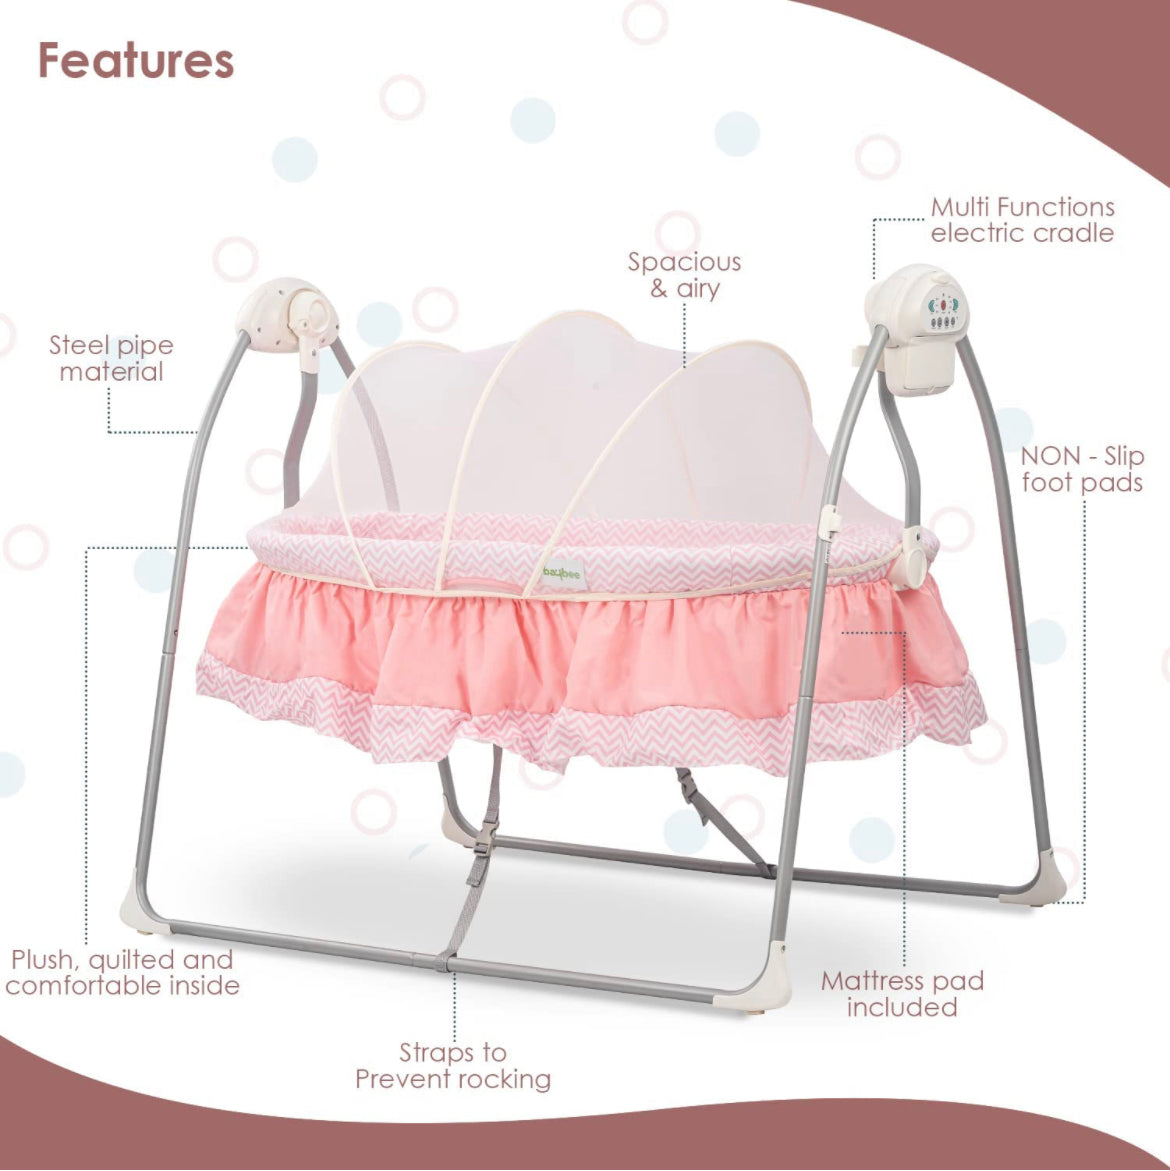 Wanda AutomaticElectric Baby Swing Cradle with Mosquito Net, Remote, Toy Bar & Music 0-24 Months (Pink) - The Minikin Store